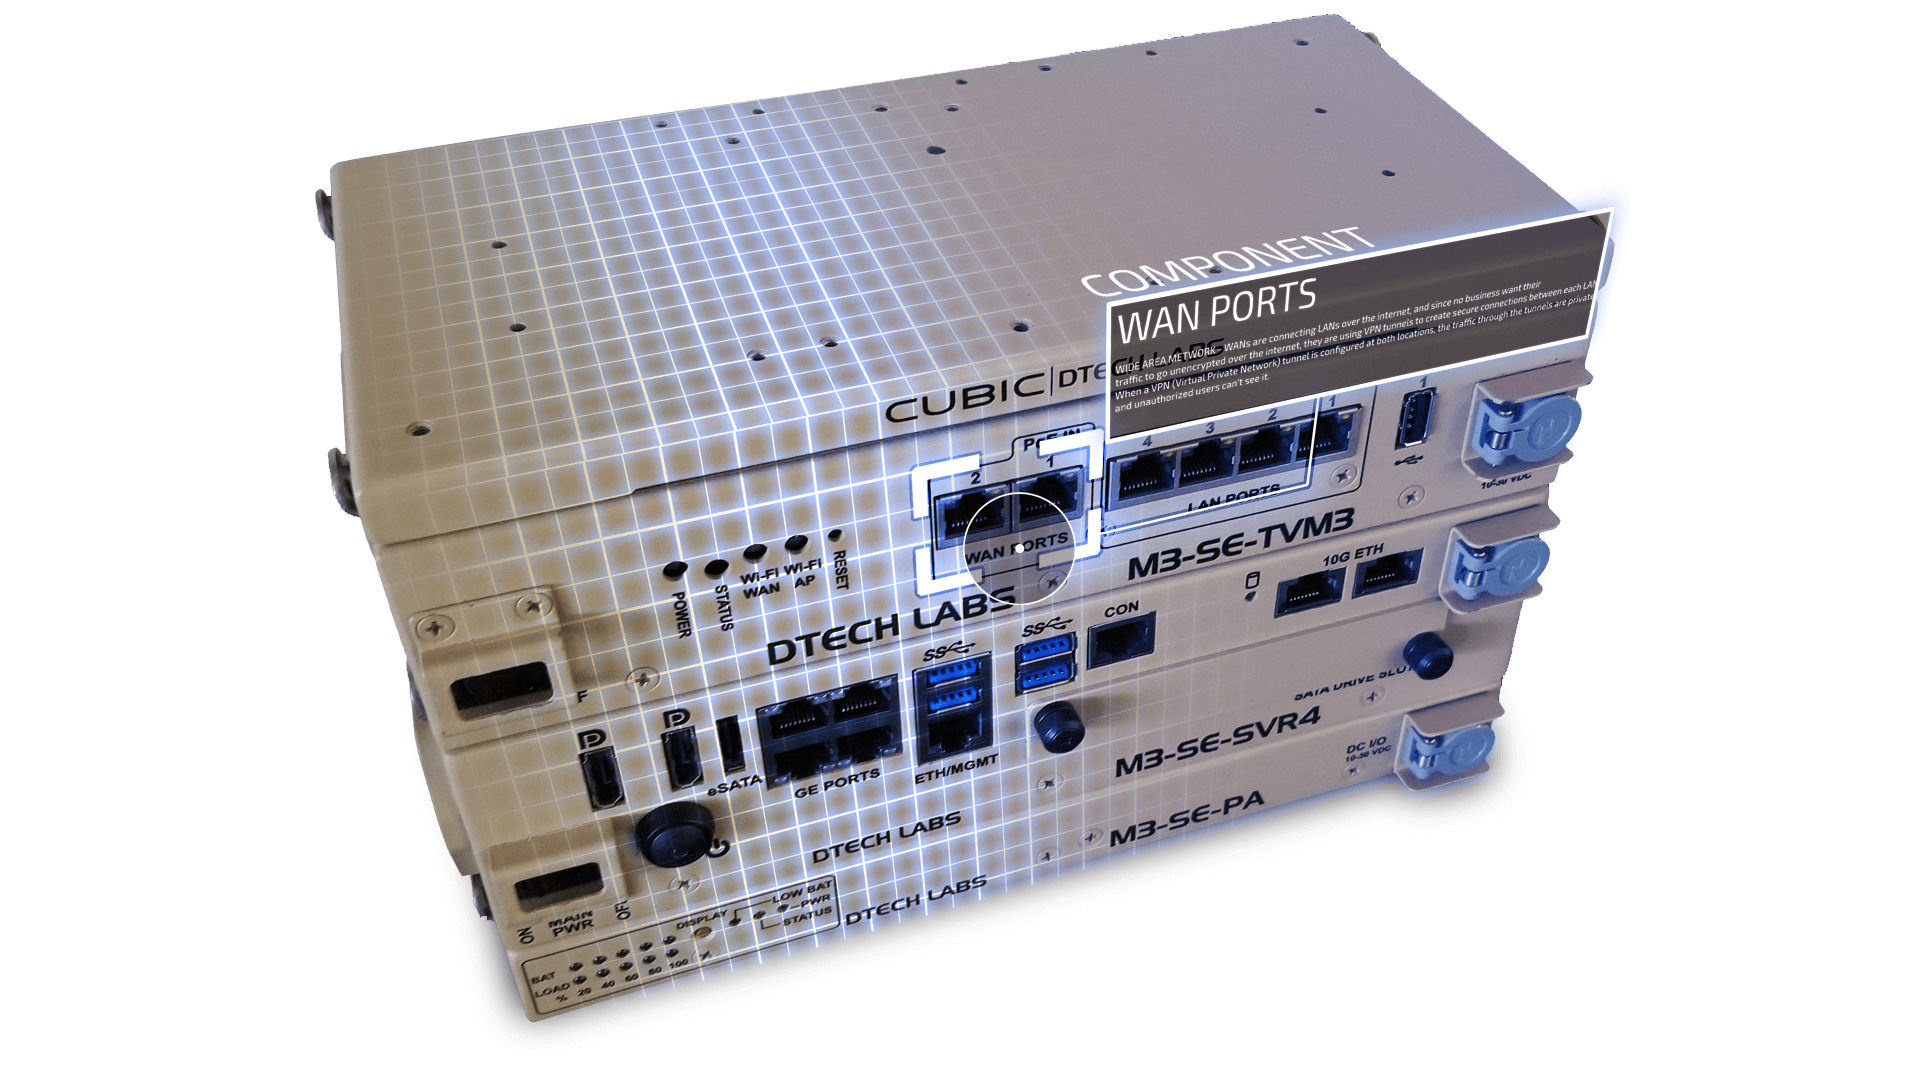 D-Tech Router with Assistive Reality computer vision